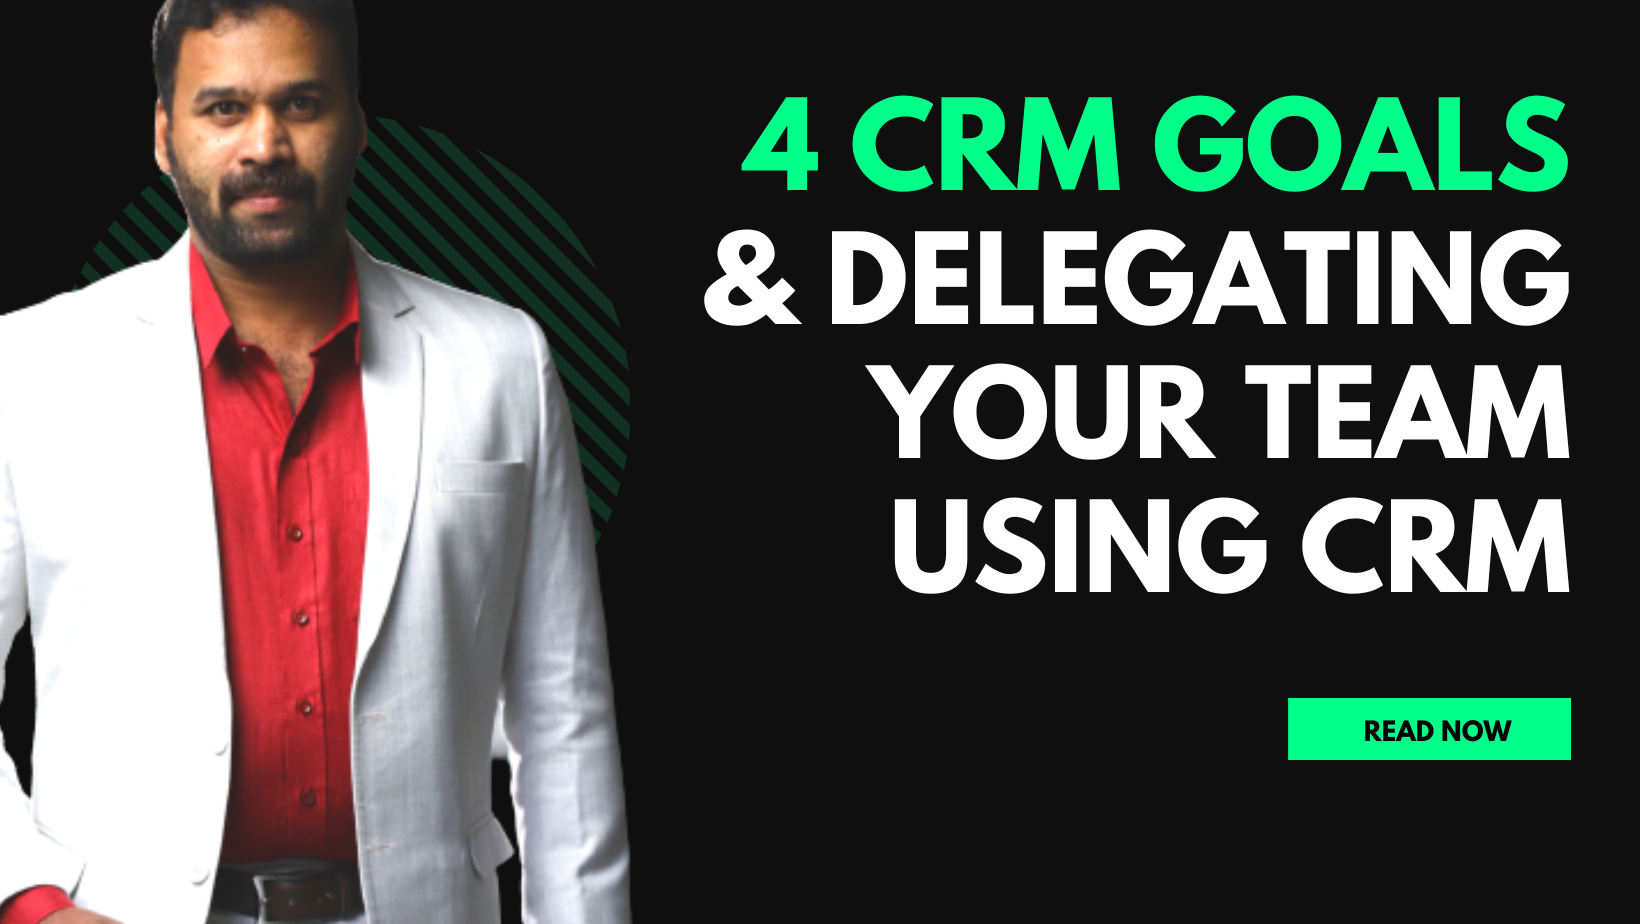 4 CRM Goals & How to delegate to your team using CRM